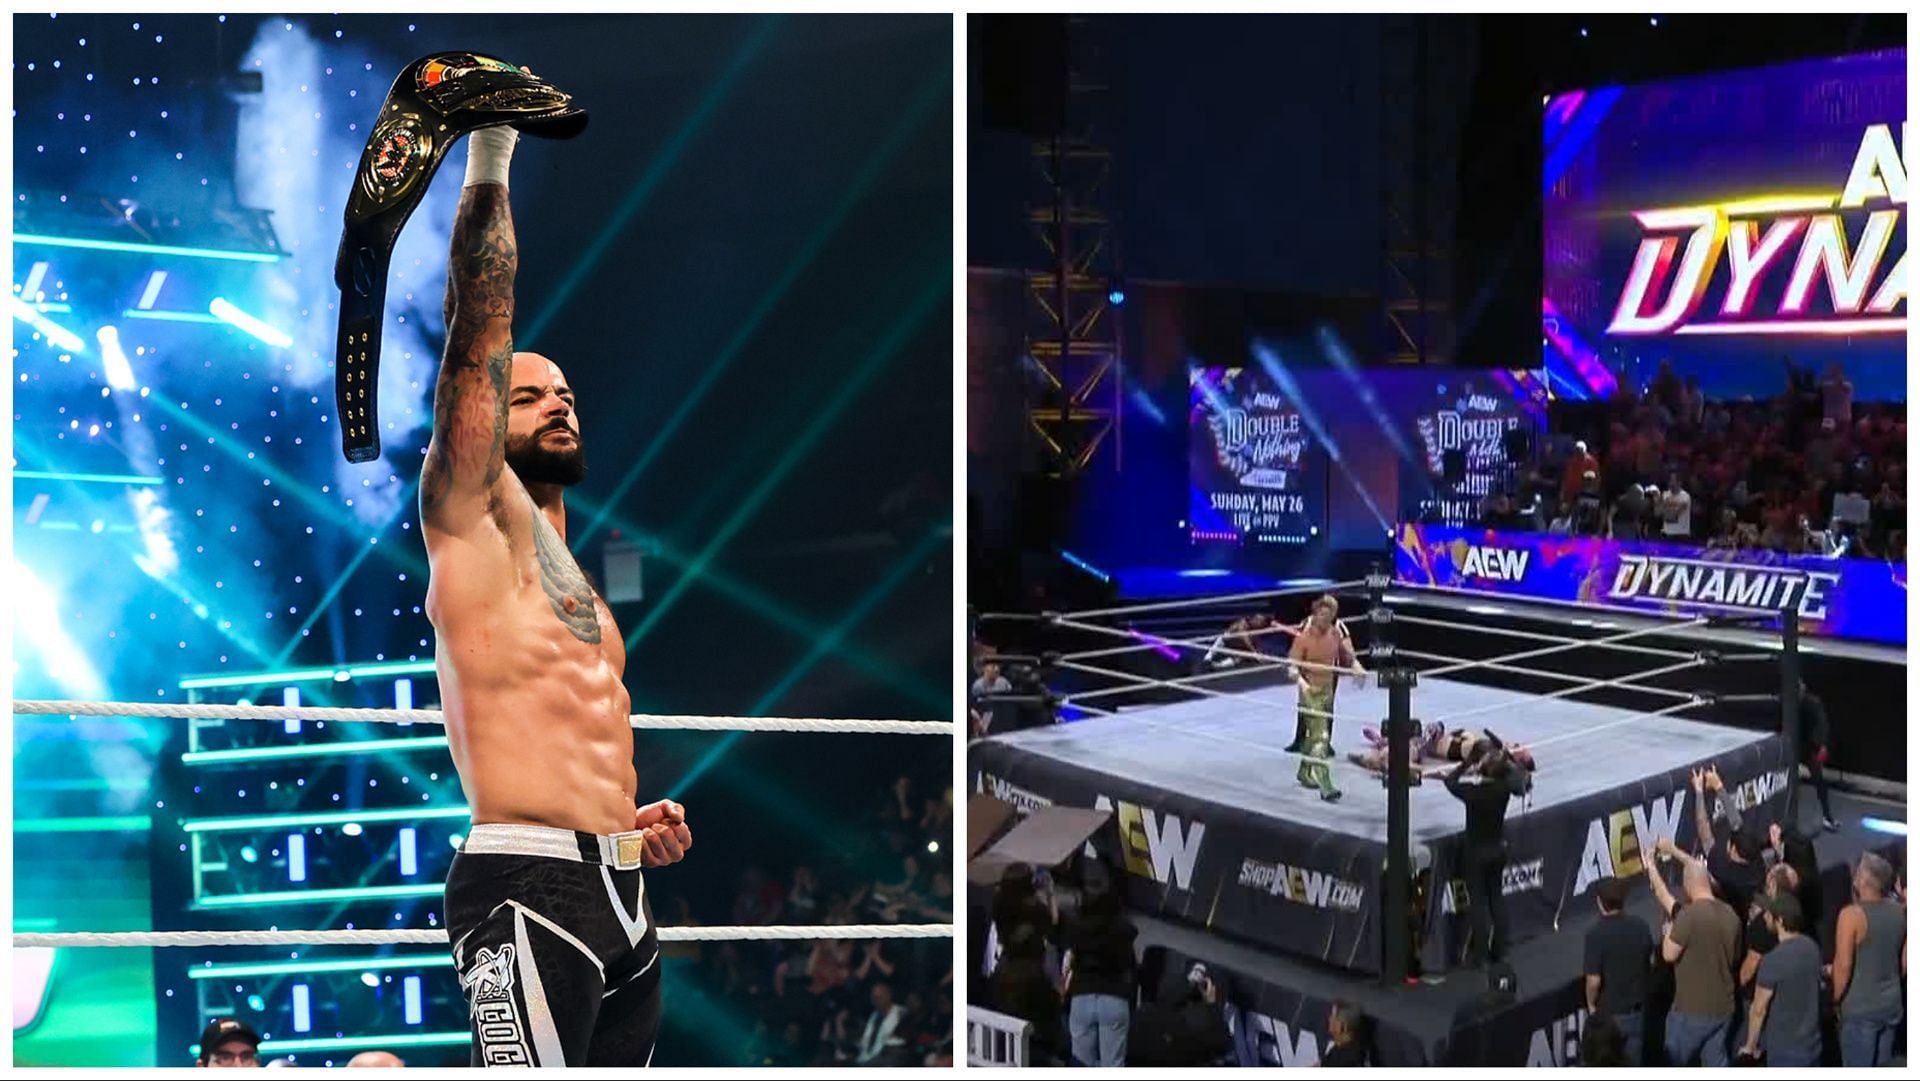 Ricochet becomes the inaugural WWE Speed Champion, Will Ospreay and fans at AEW Dynamite in Jacksonville